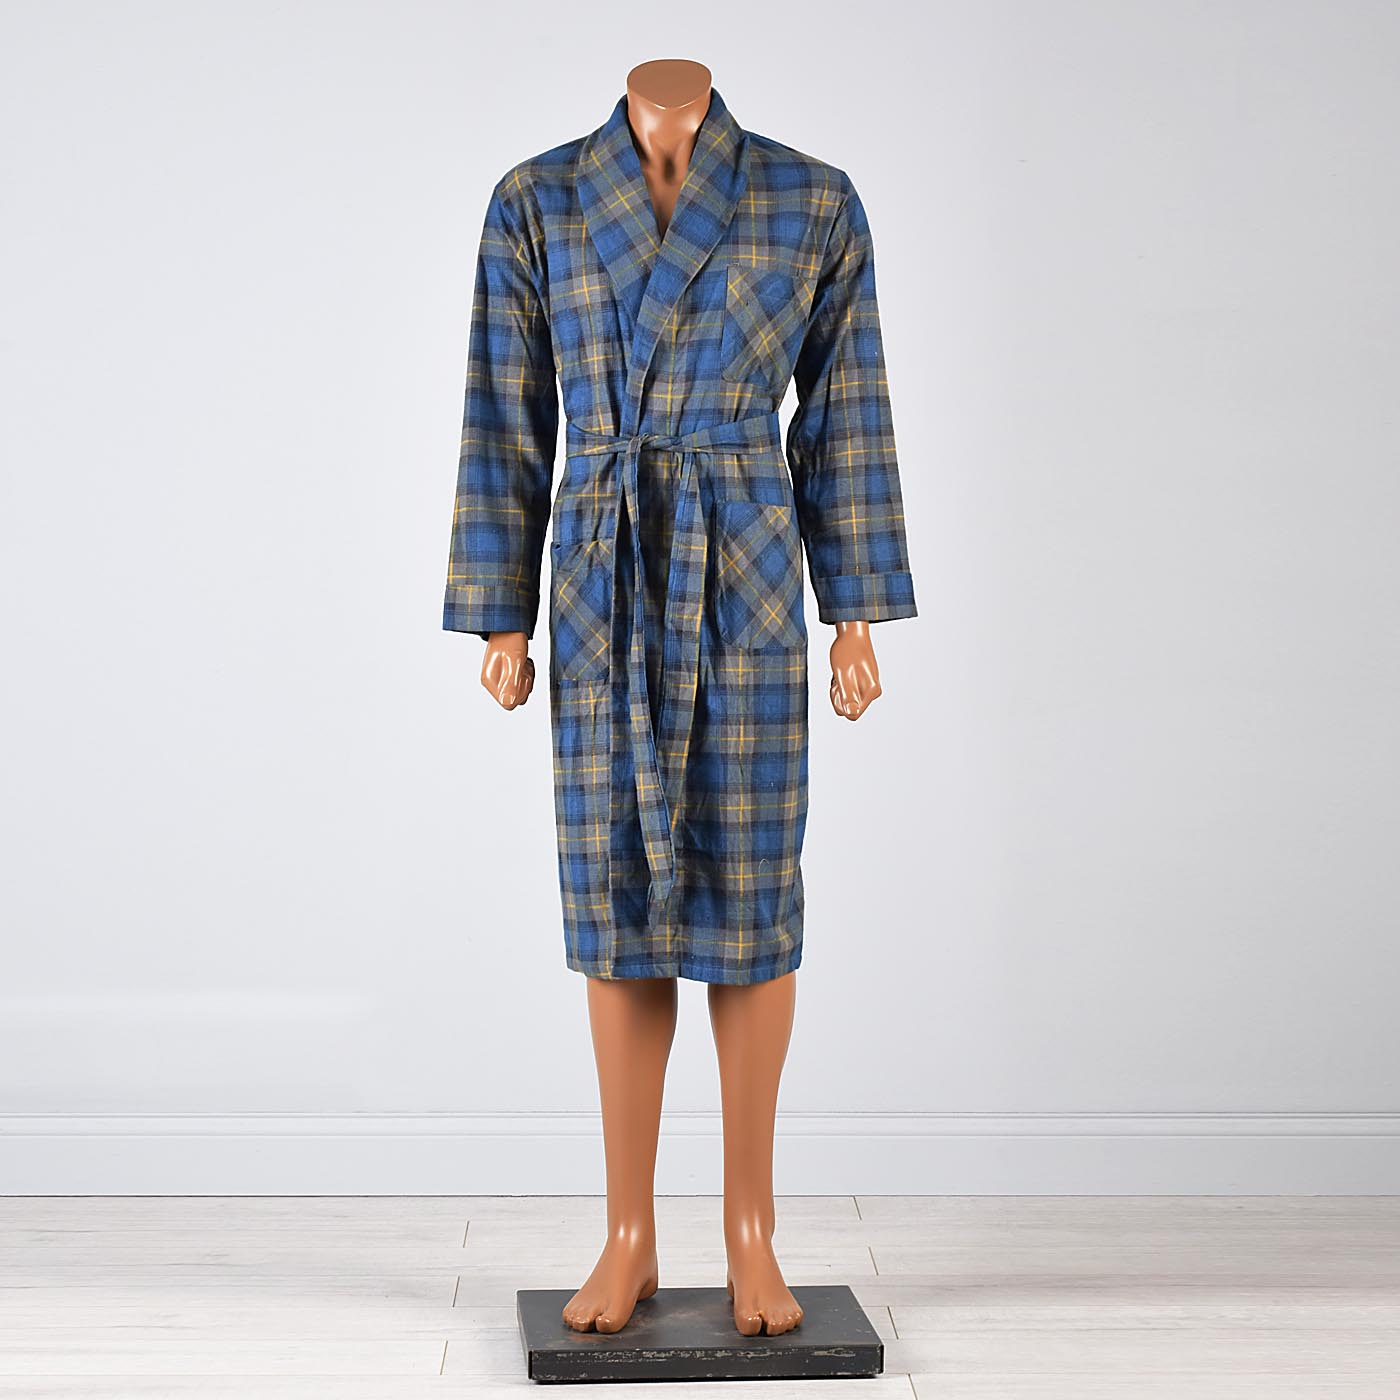 1960s Mens Deadstock Flannel Robe in Blue and Green Plaid